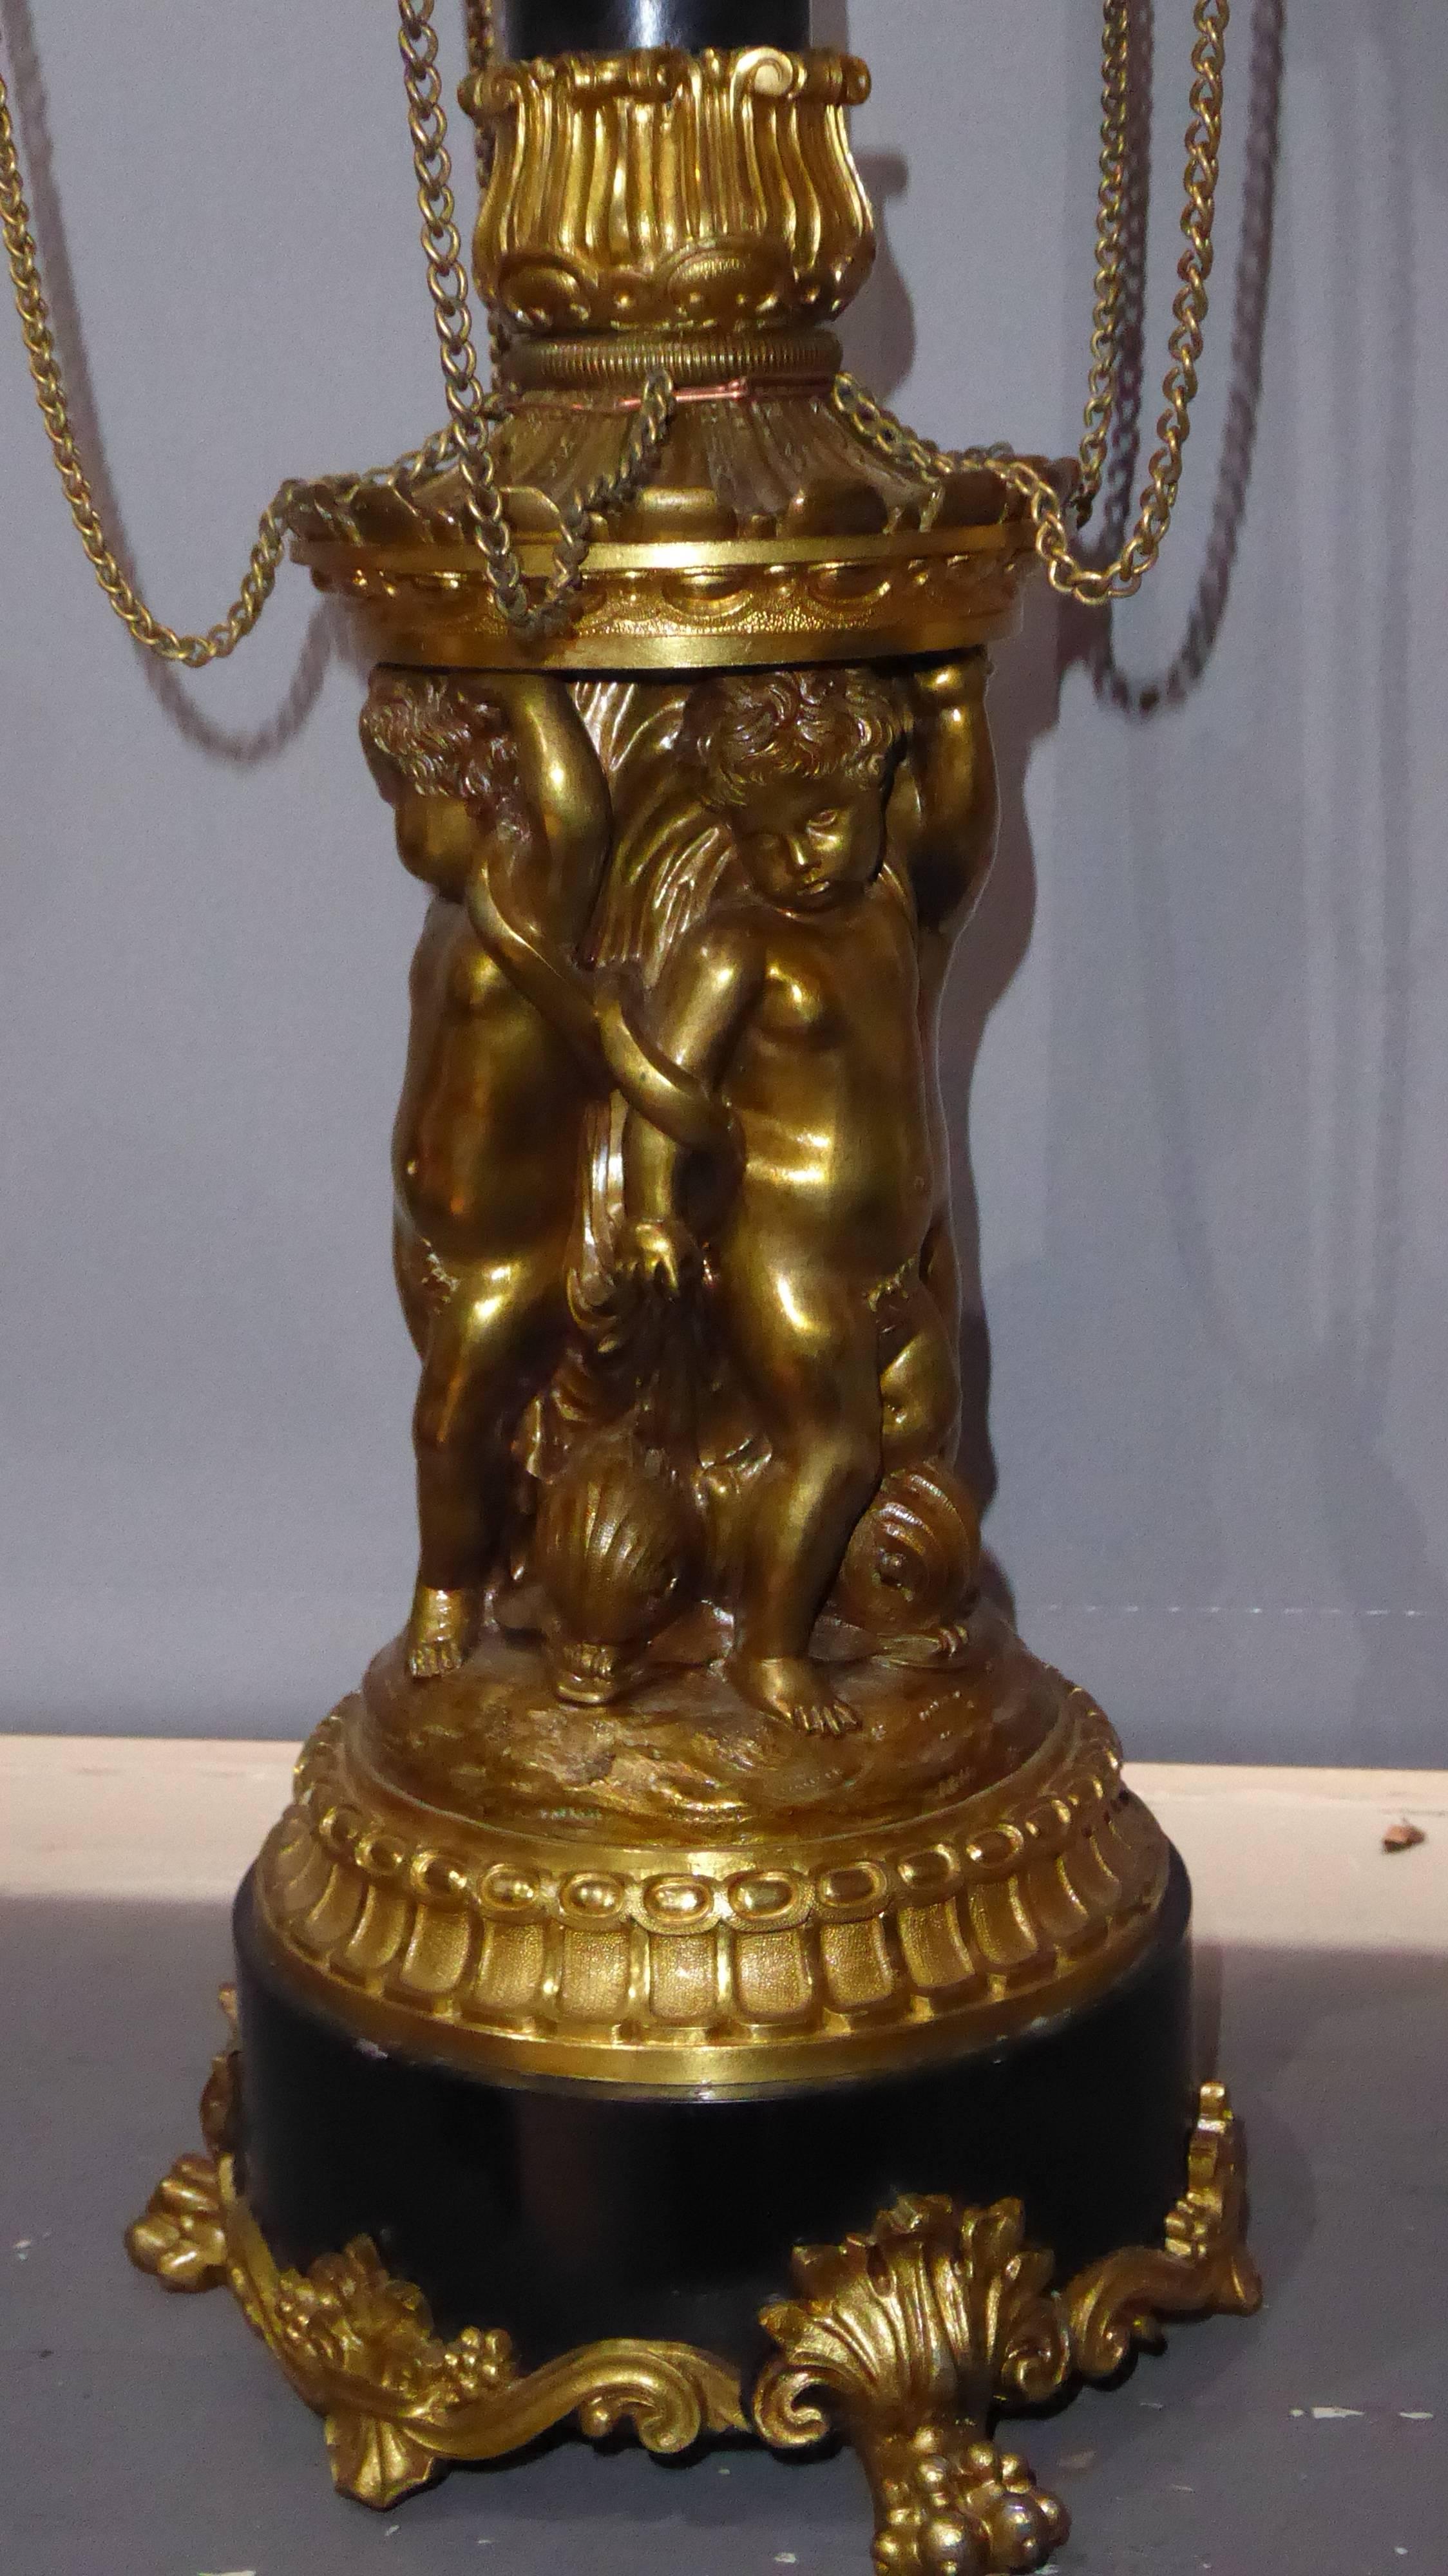 A fine pair of 19th century Empire gilt bronze five branch candelabra, the moulded sconces of oil lamp form, united by chains, support on a slate column held by four cherubs and diving Dolphins terminating on three lion paw feet.